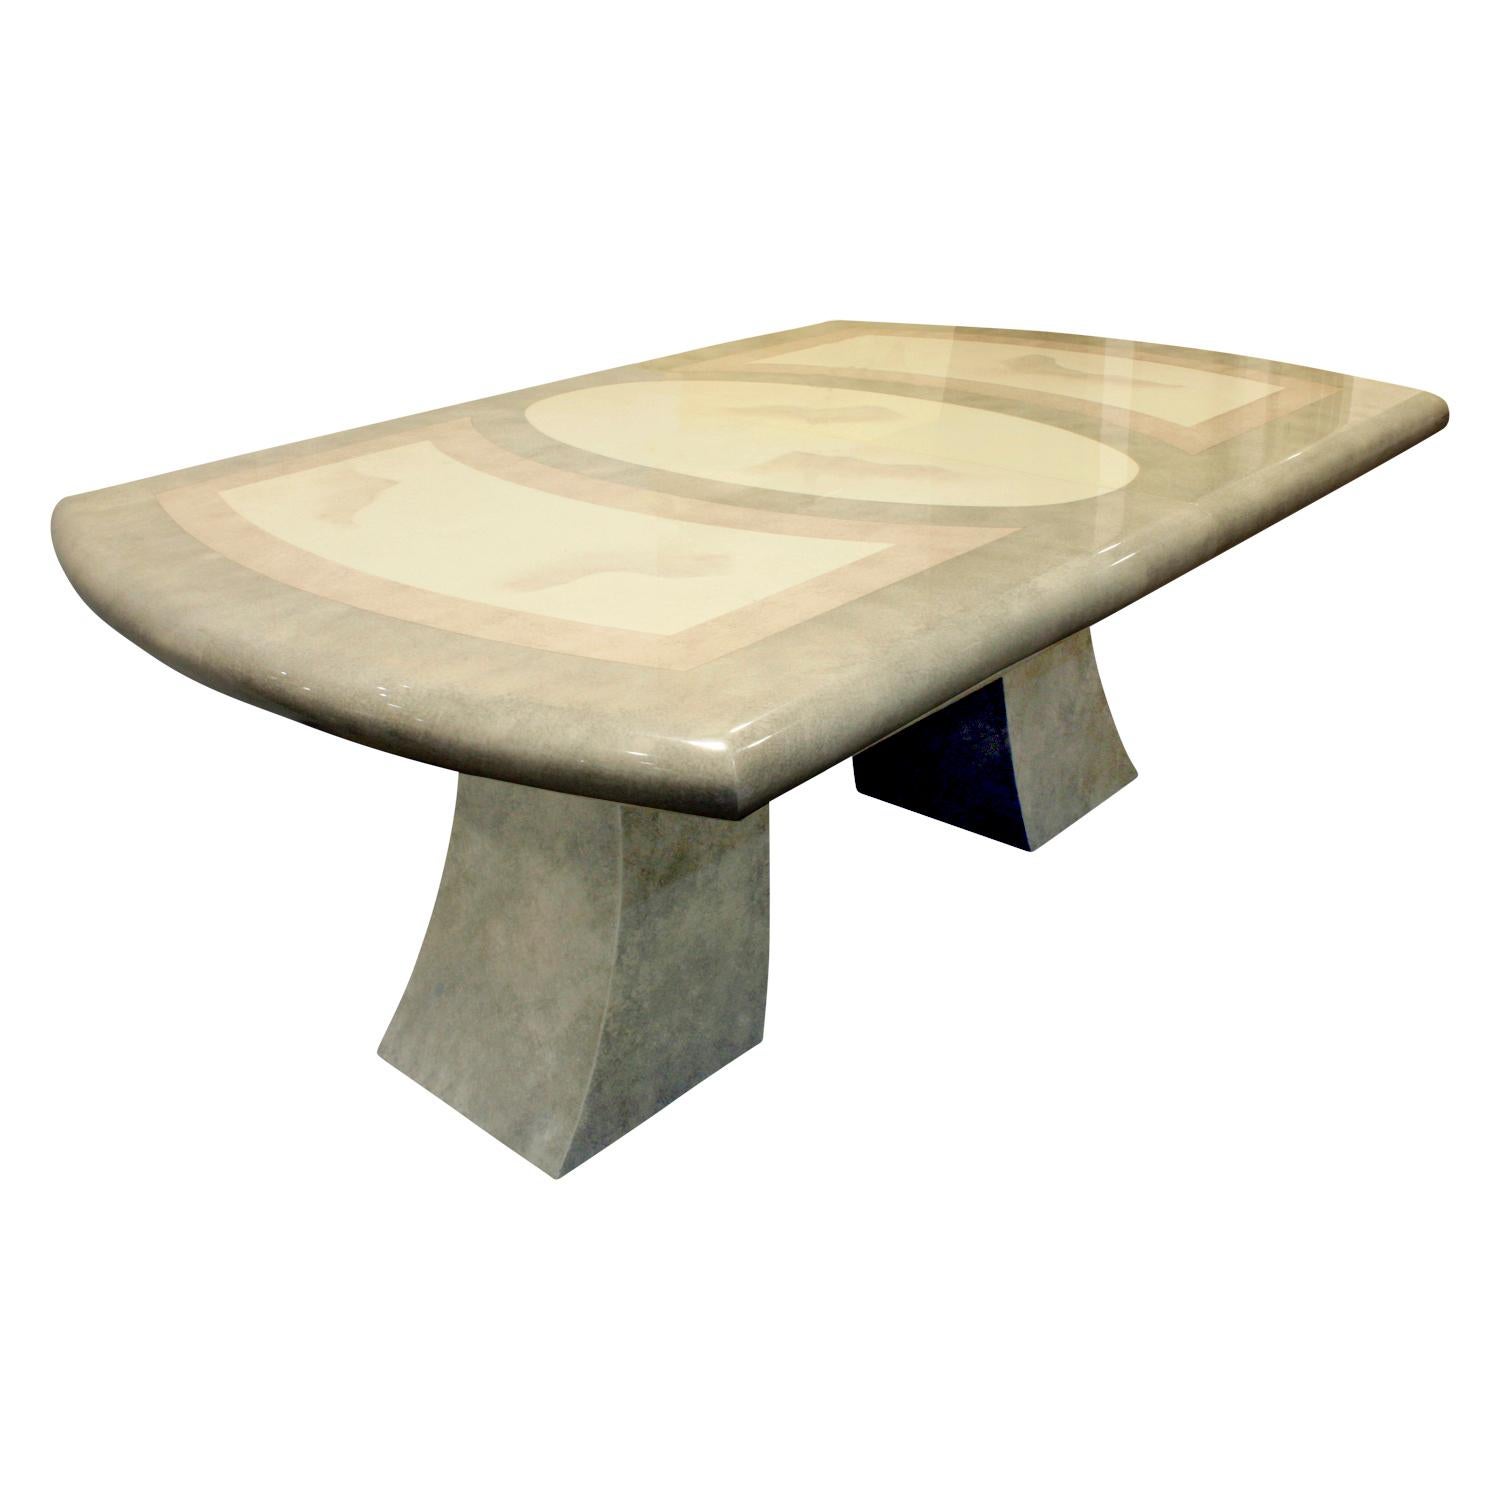 Karl Springer Style Extension Dining Table with Artisan Faux Goatskin, 1980s